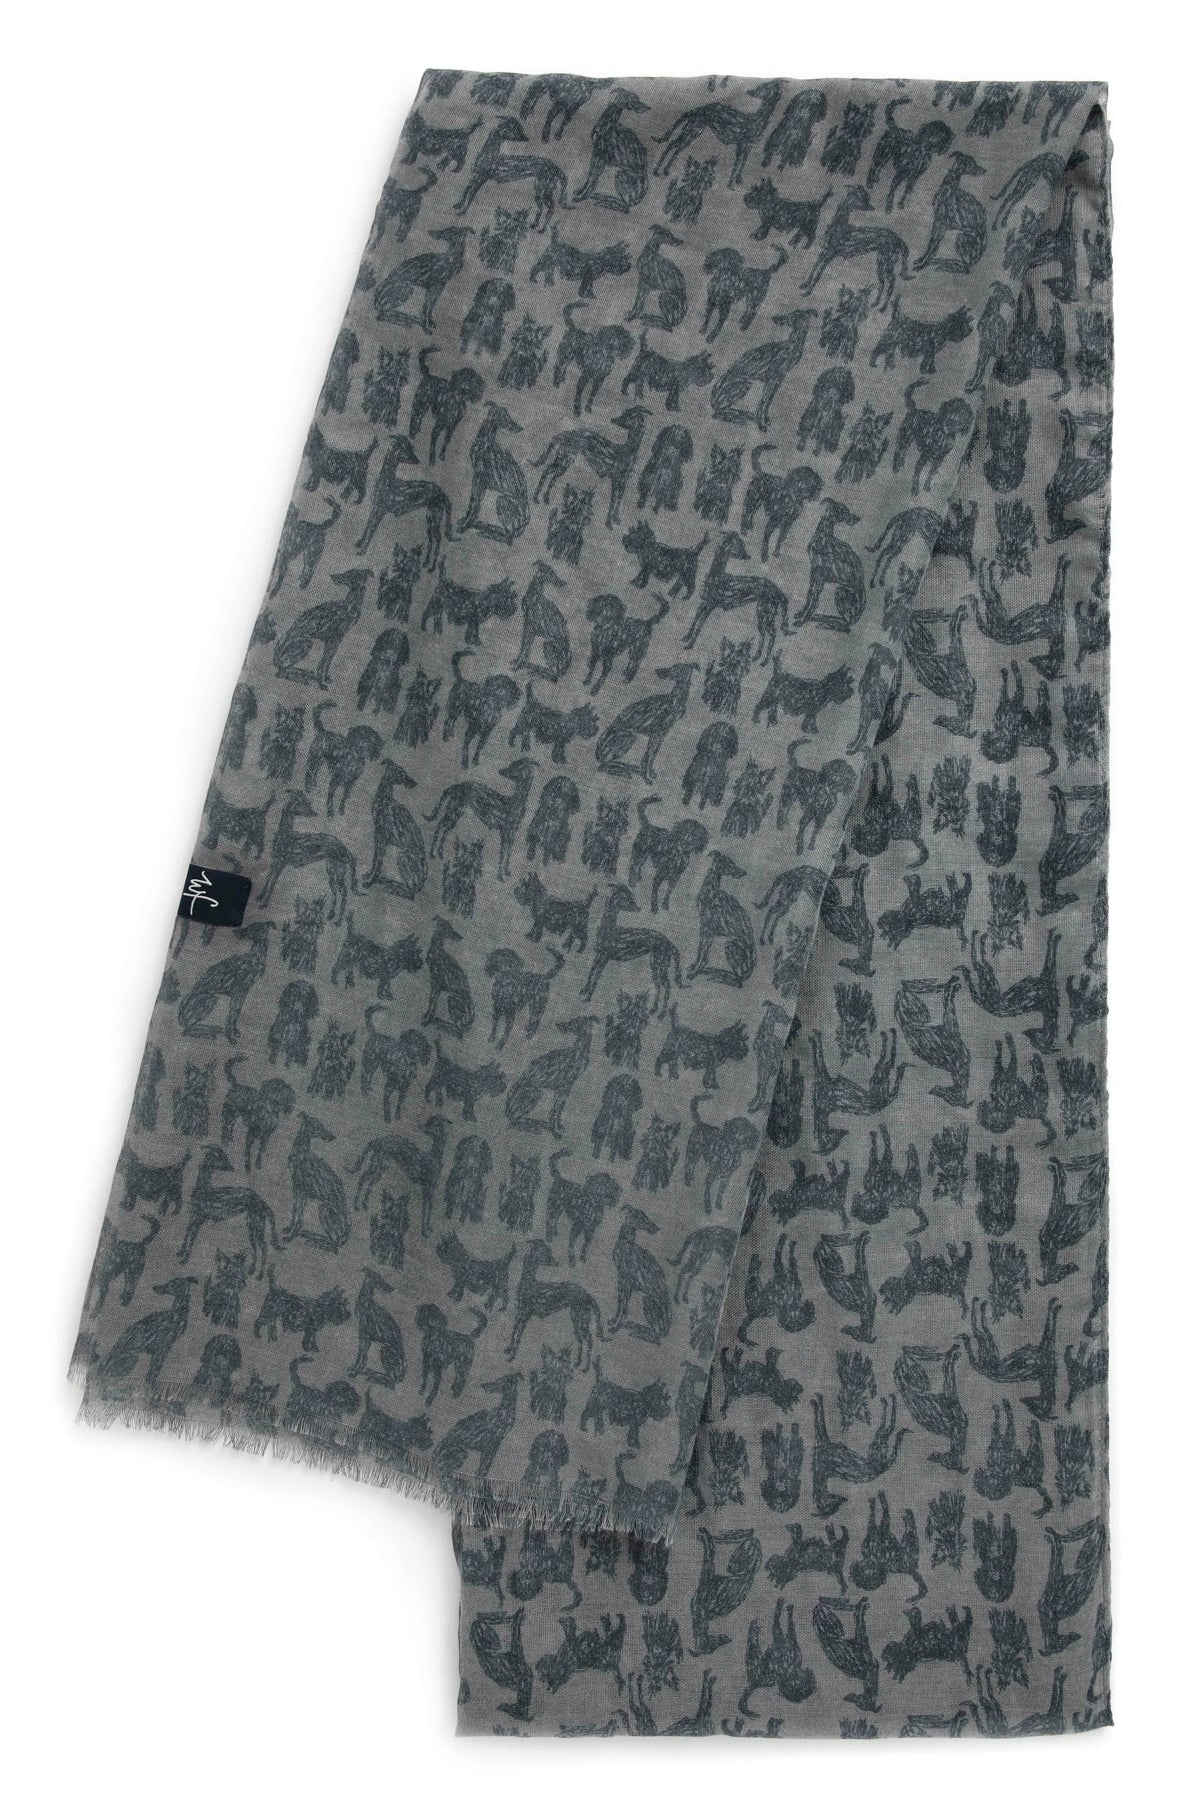 Lightweight Alverton scarf from Weird Fish in Dusty Blue with a sketch style dog print.